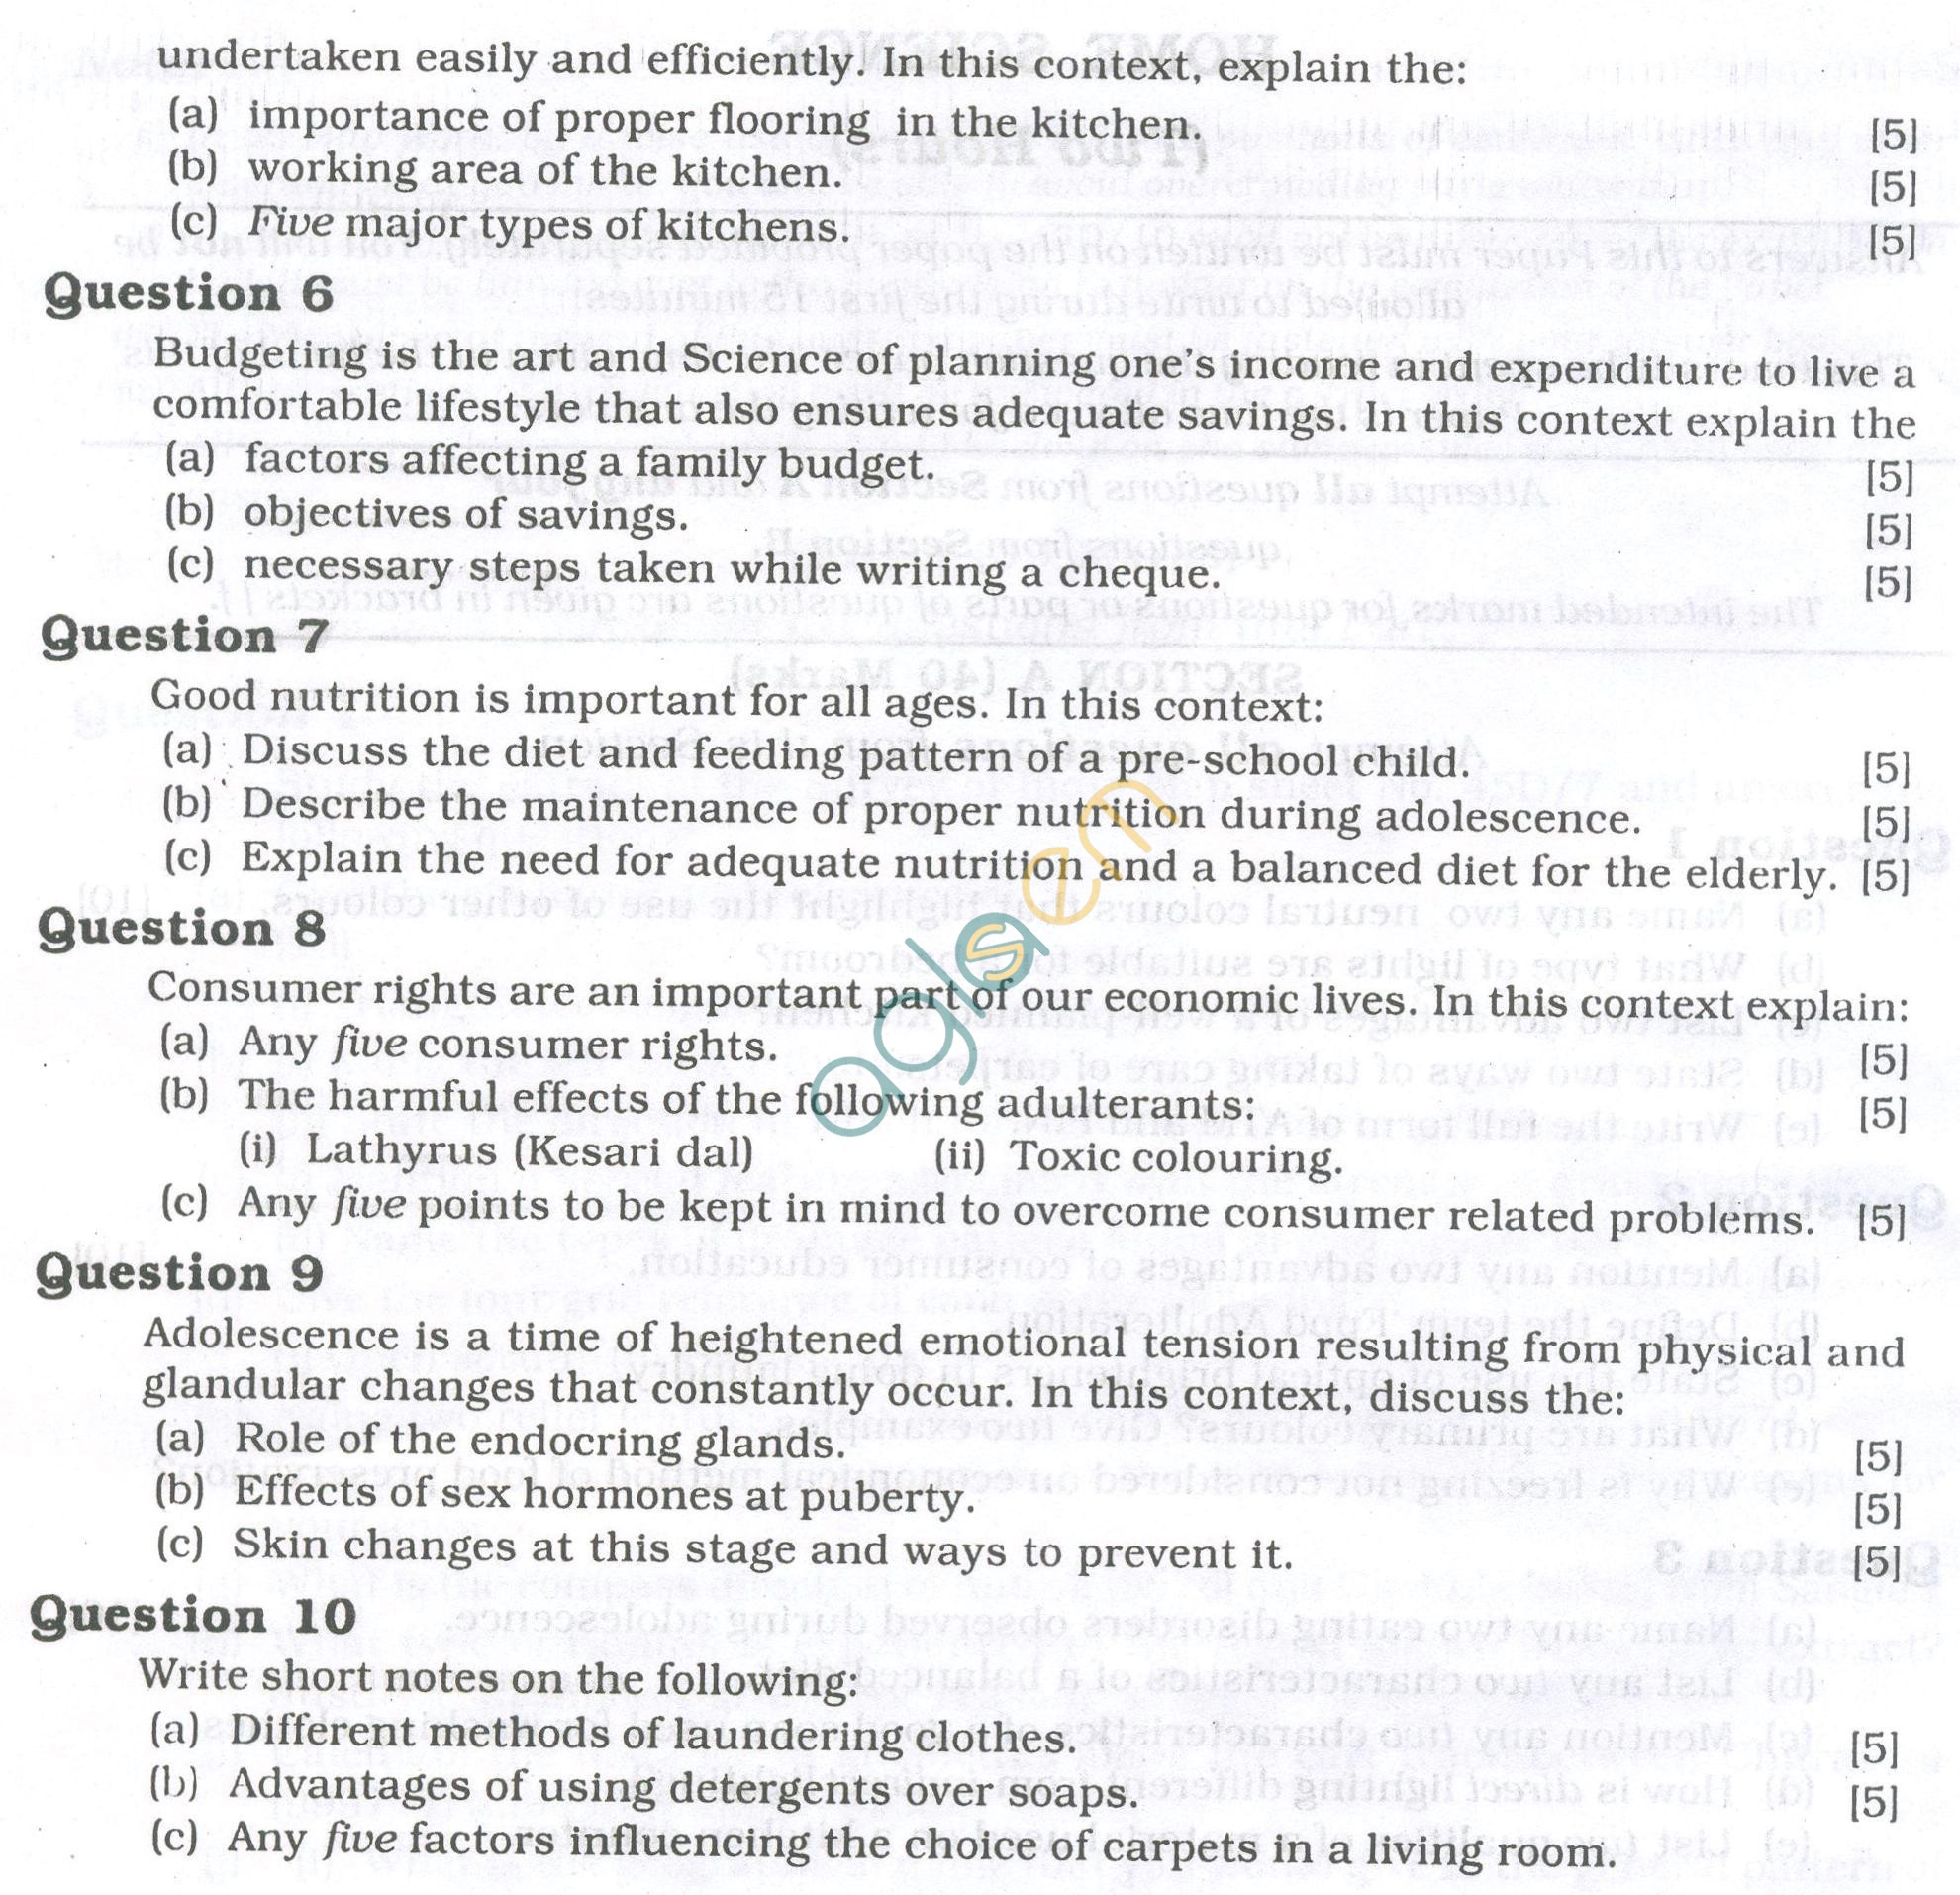 ICSE Question Papers 2013 for Class 10 - Home Science/